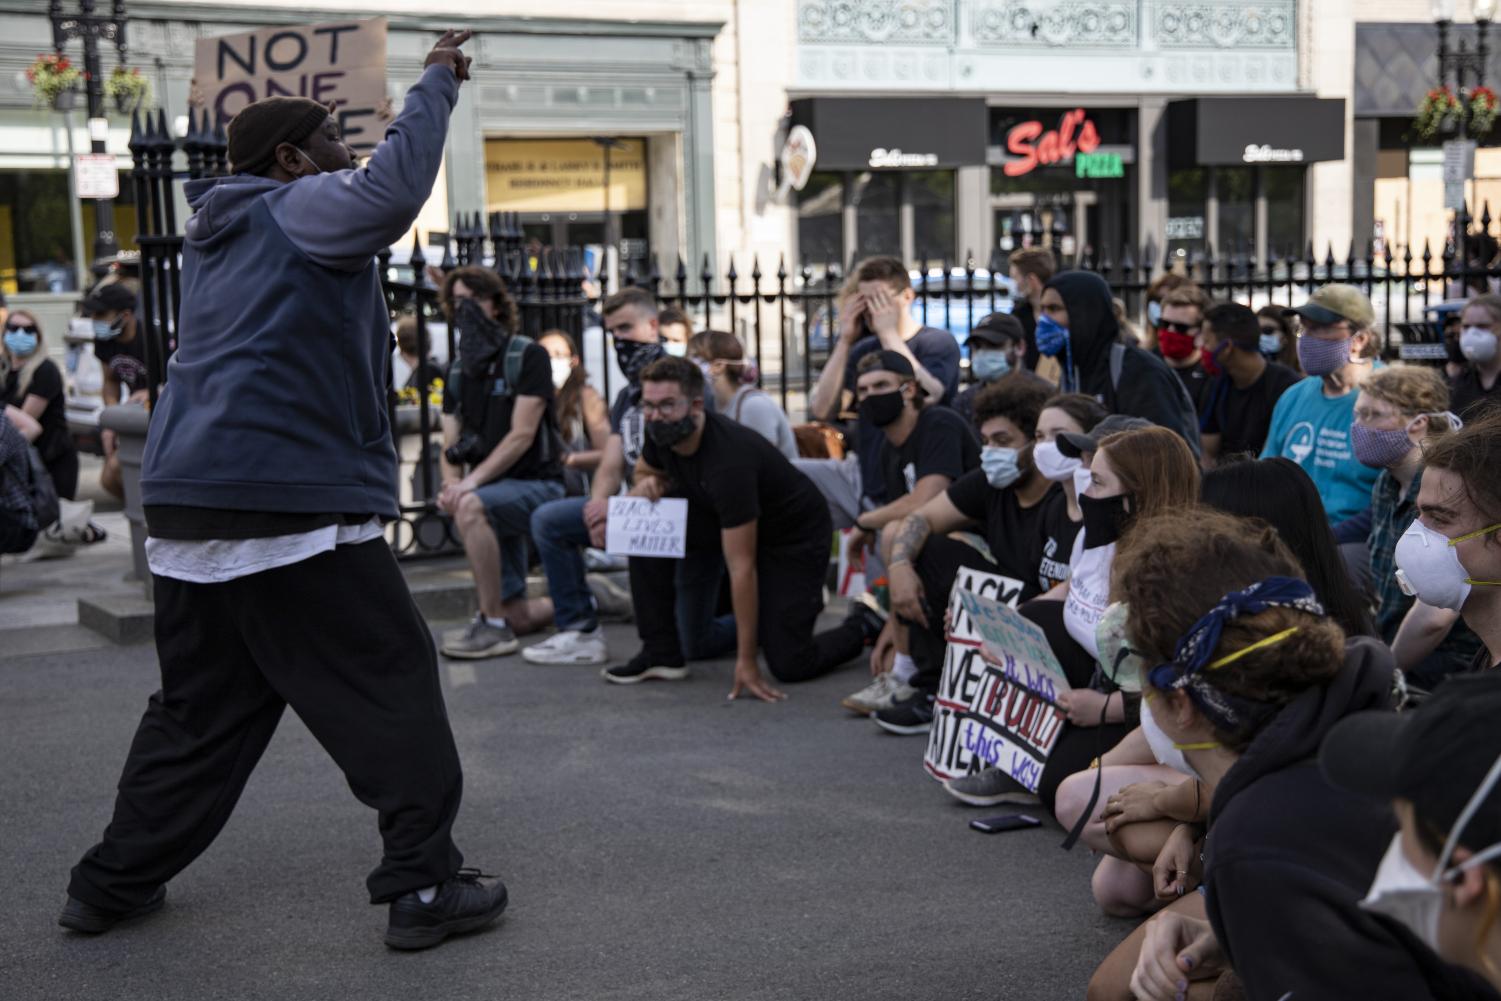 Heres+a+timeline+showing+how+protests+stayed+peaceful+in+Boston